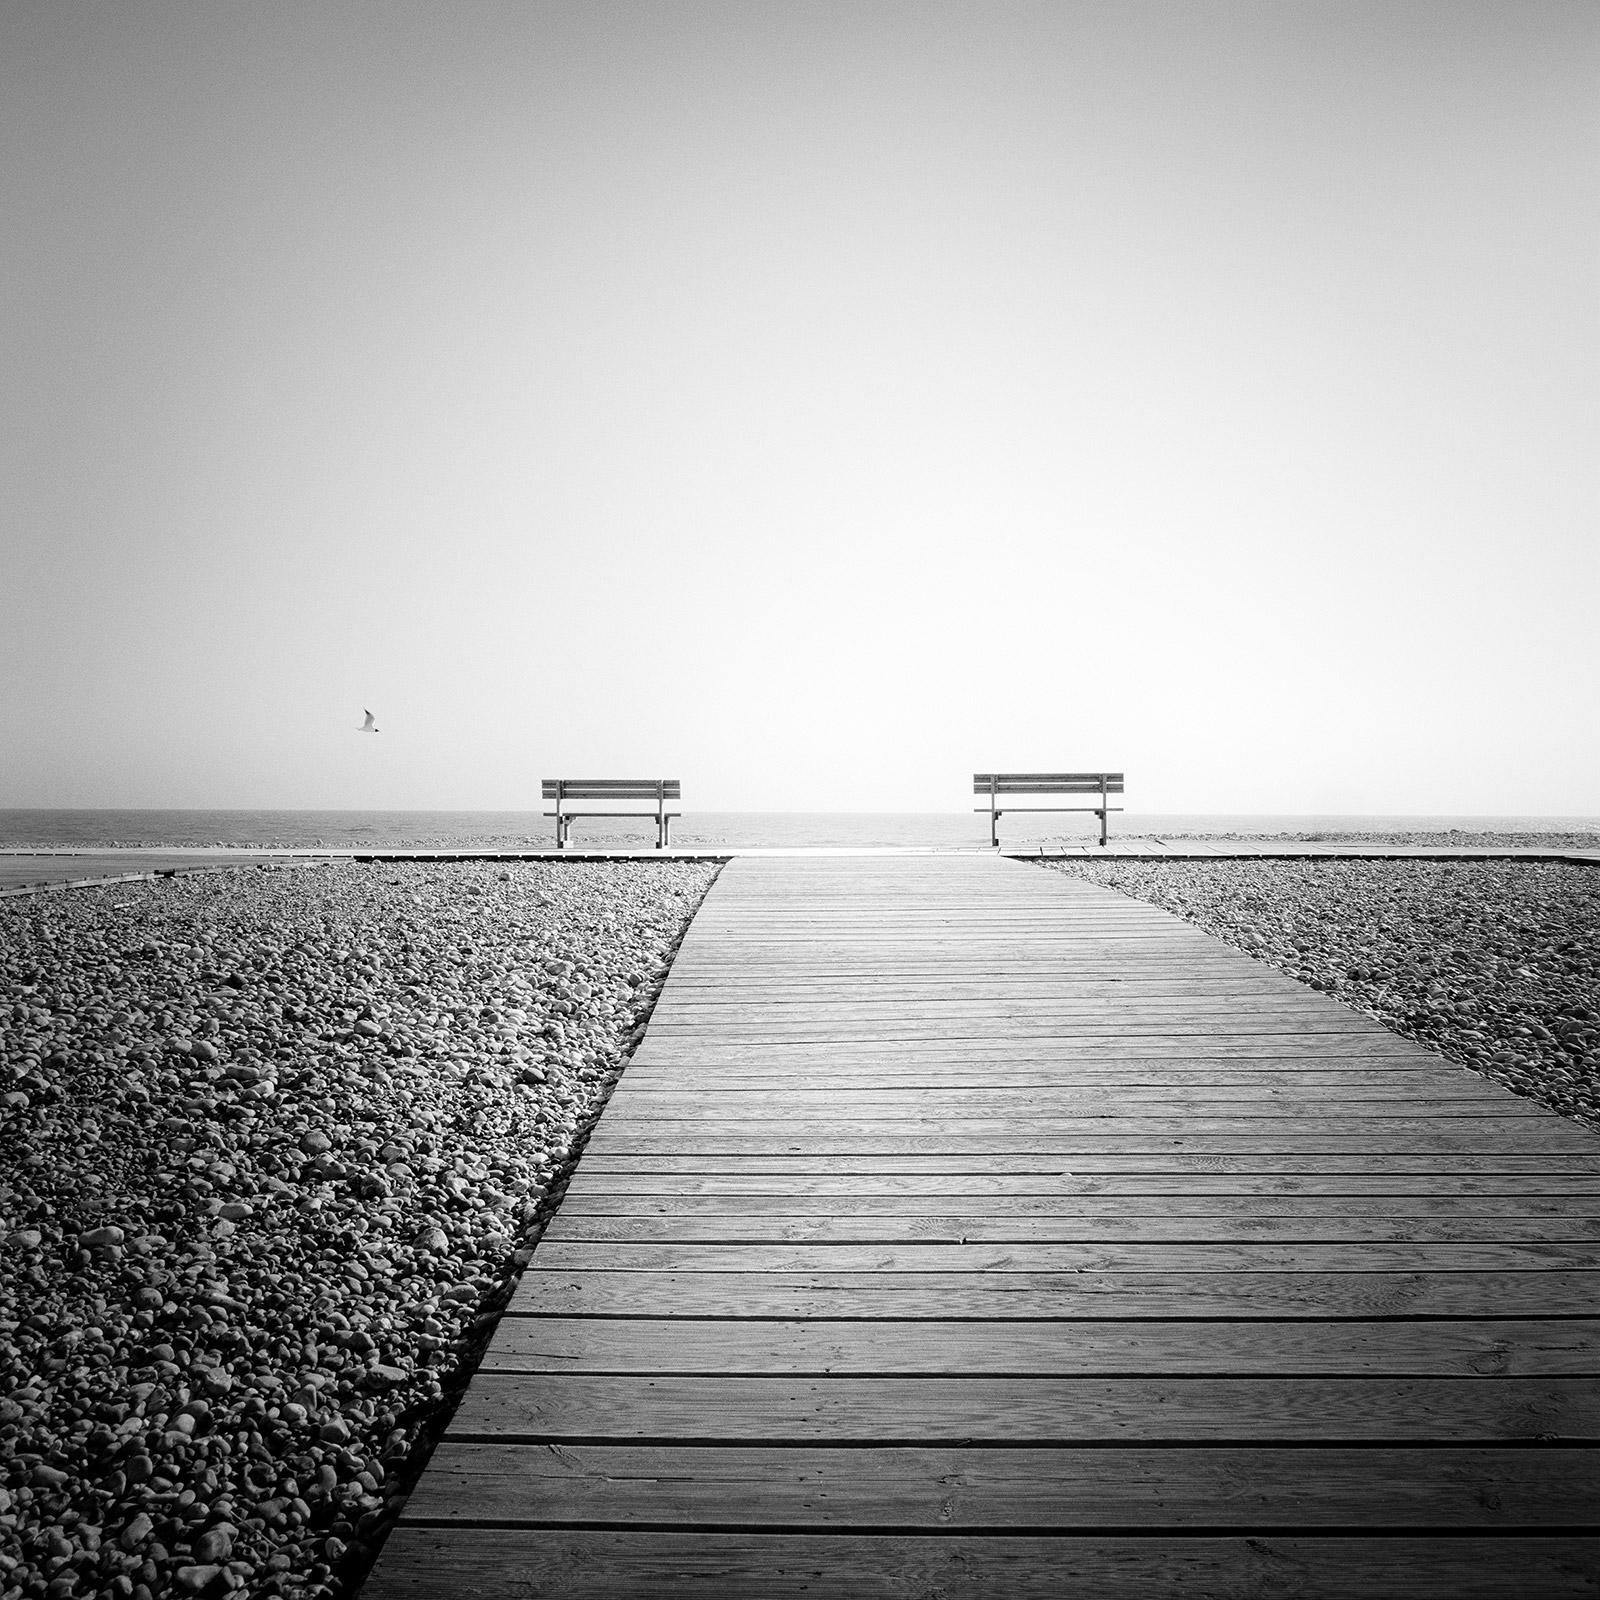 Esplanade, lonely rocky beach, France, Black and White landscape art photography